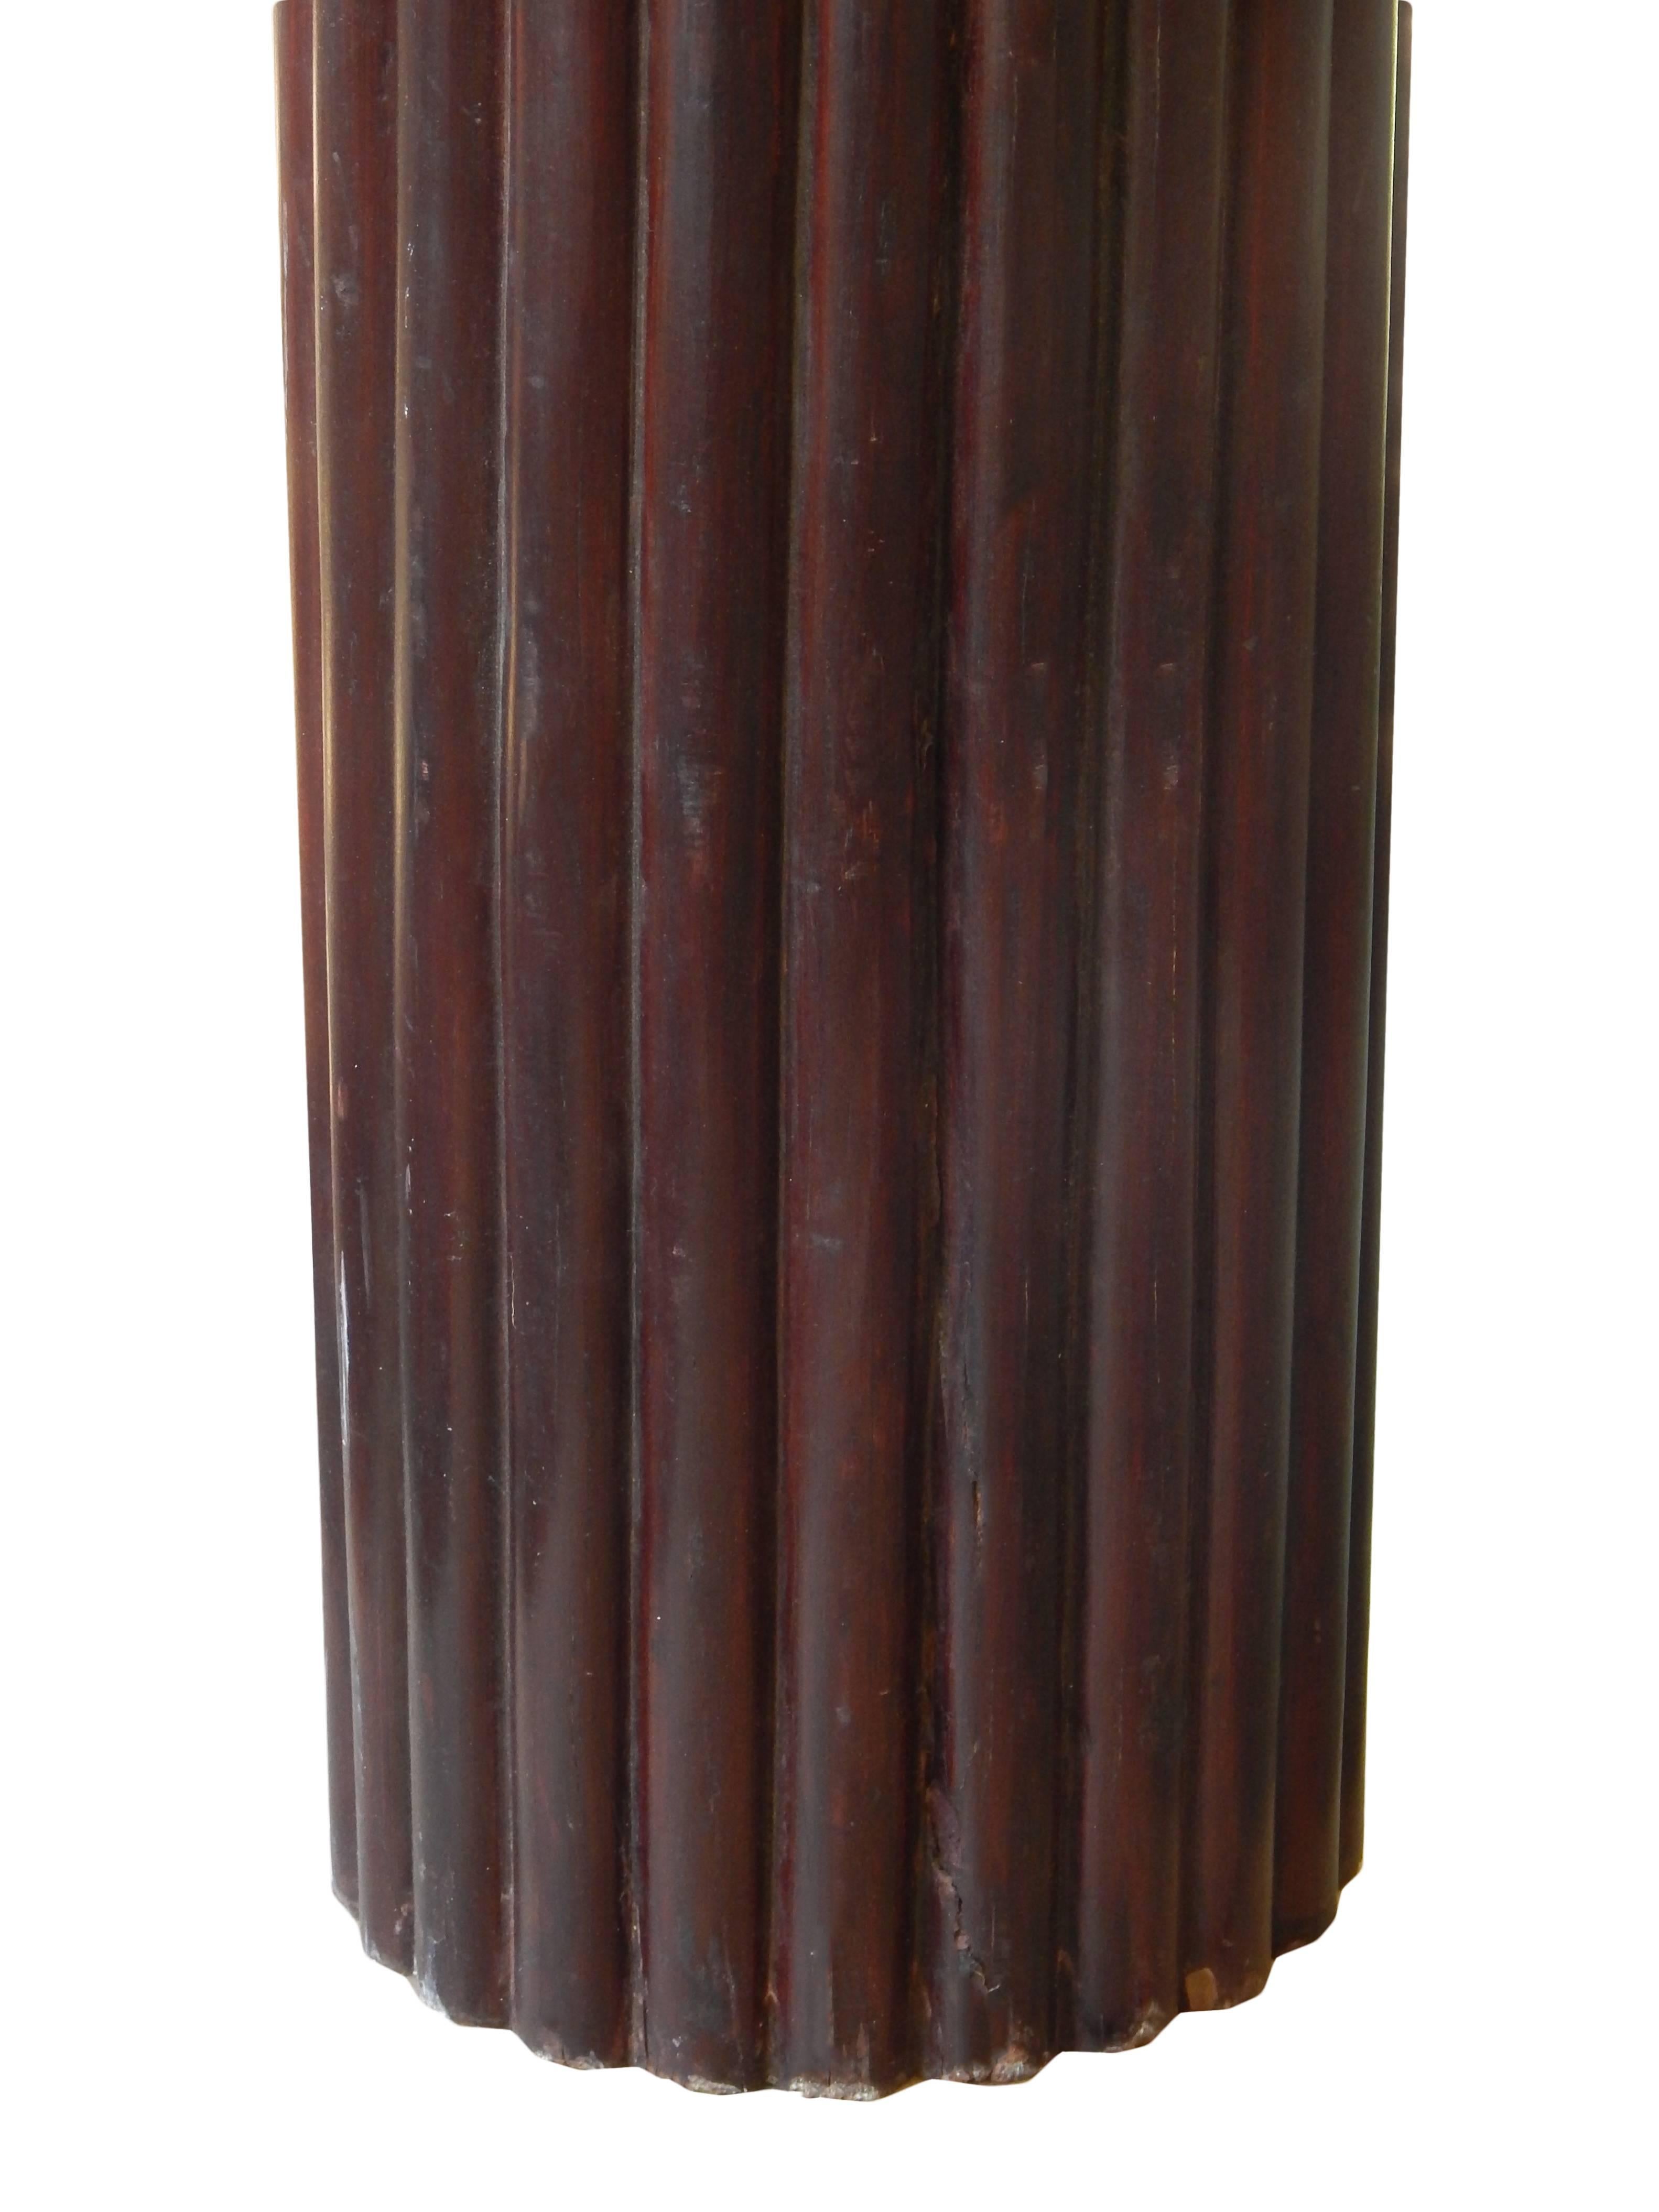 Anglo-Raj Solid Rosewood Columns For Sale 1